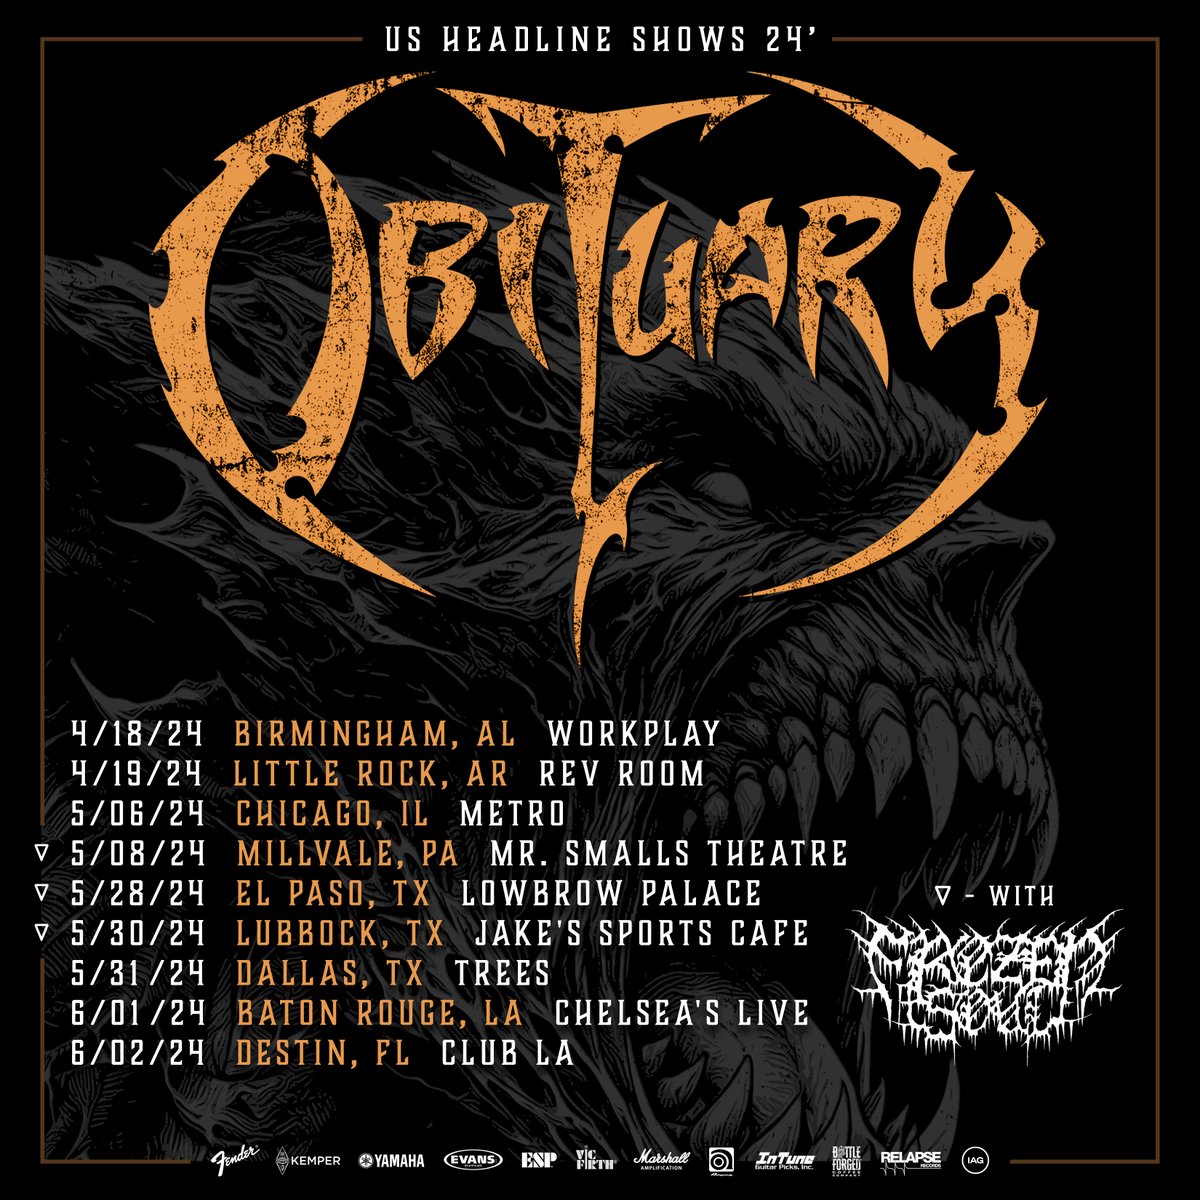 Special OBITUARY headline shows around our North America tour with @AmonAmarthBand, @CorpseOfficial & @Frozensoultx (on select headline dates)! Tickets on sale now at obituary.cc/events.html